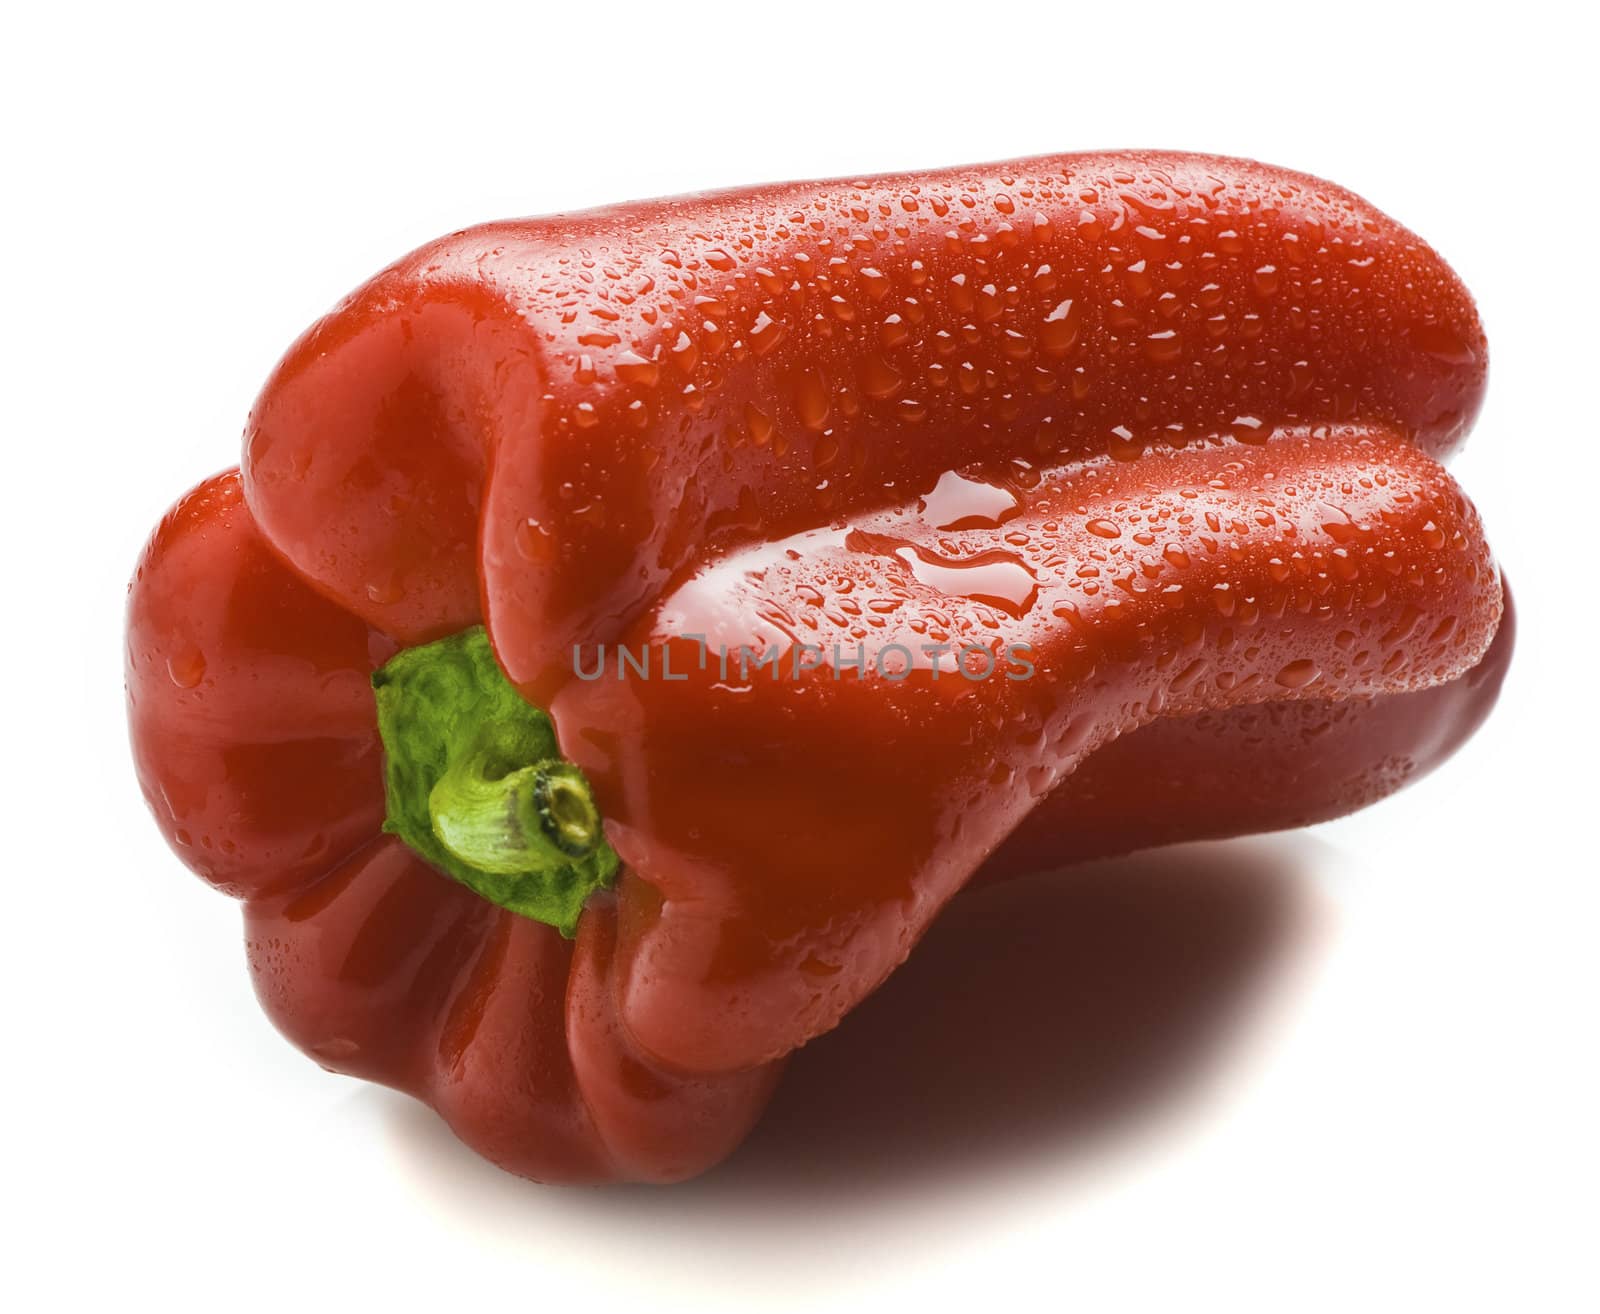 A whole red capsicum, with water droplets on it. Isolated on white.